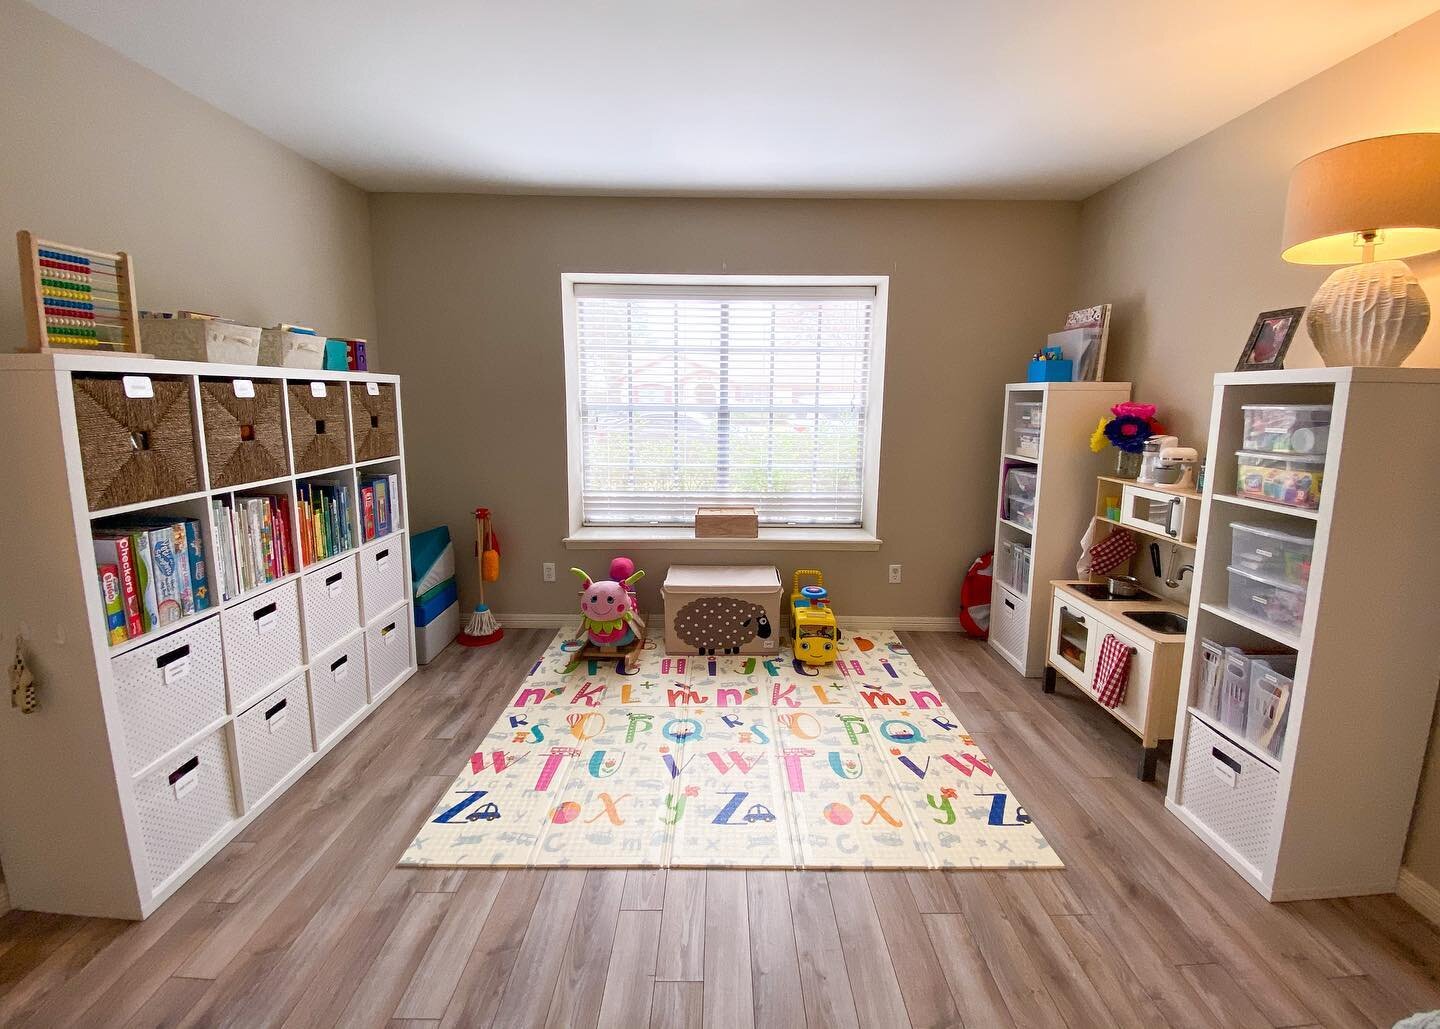 One of our final projects for 2020 was this adorable playroom! We completely rearranged the floor plan, and brought in additional shelving to maximize storage. The end result was a stylish and functional space both kids and parents could enjoy!
.
.
.